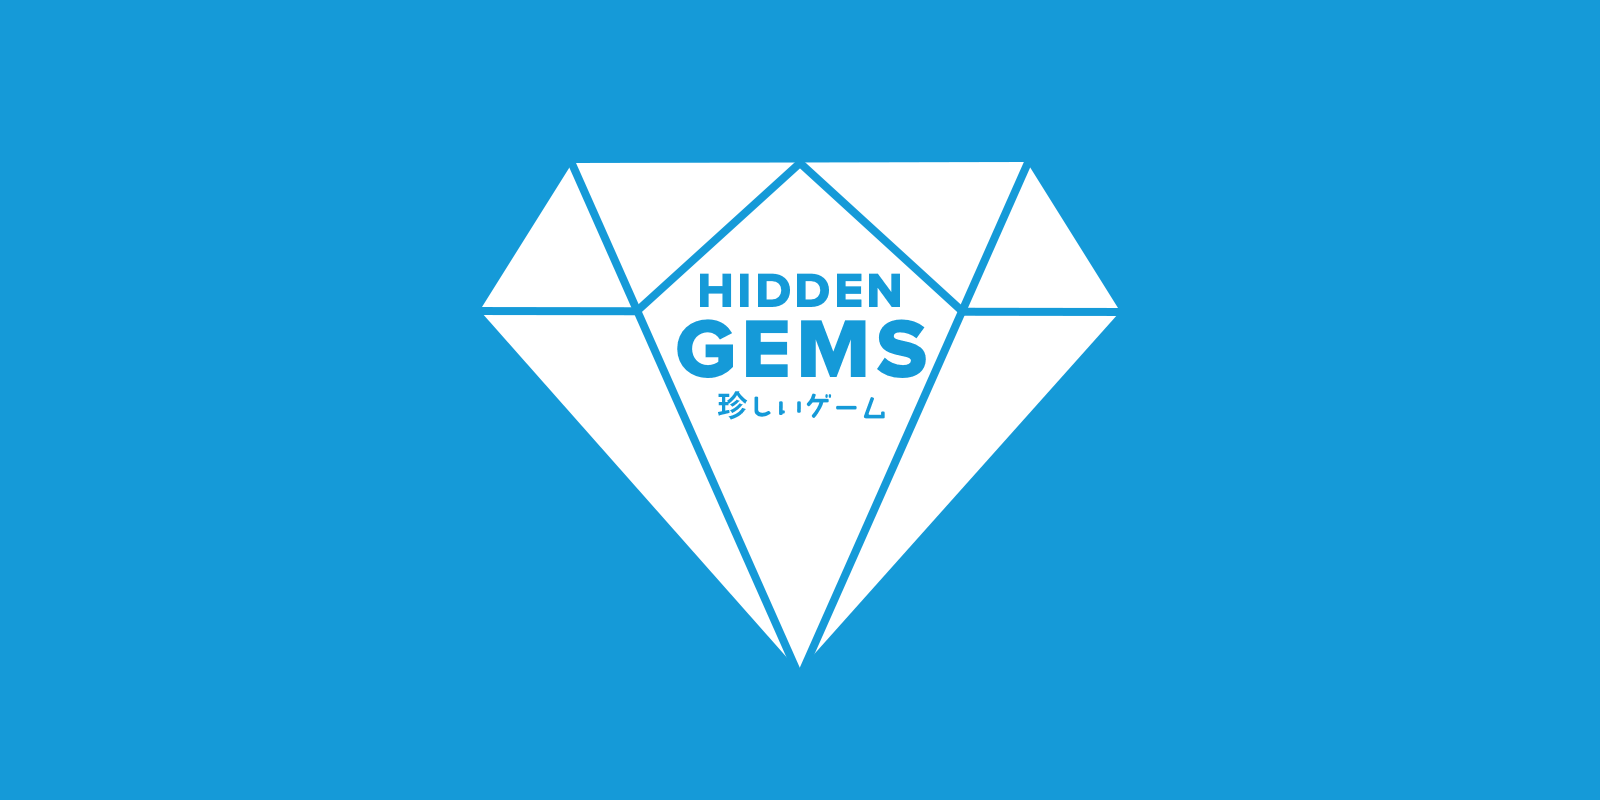 GOG.com vs. itch.io: Which PC Game Store Sells the Best Hidden Gems?